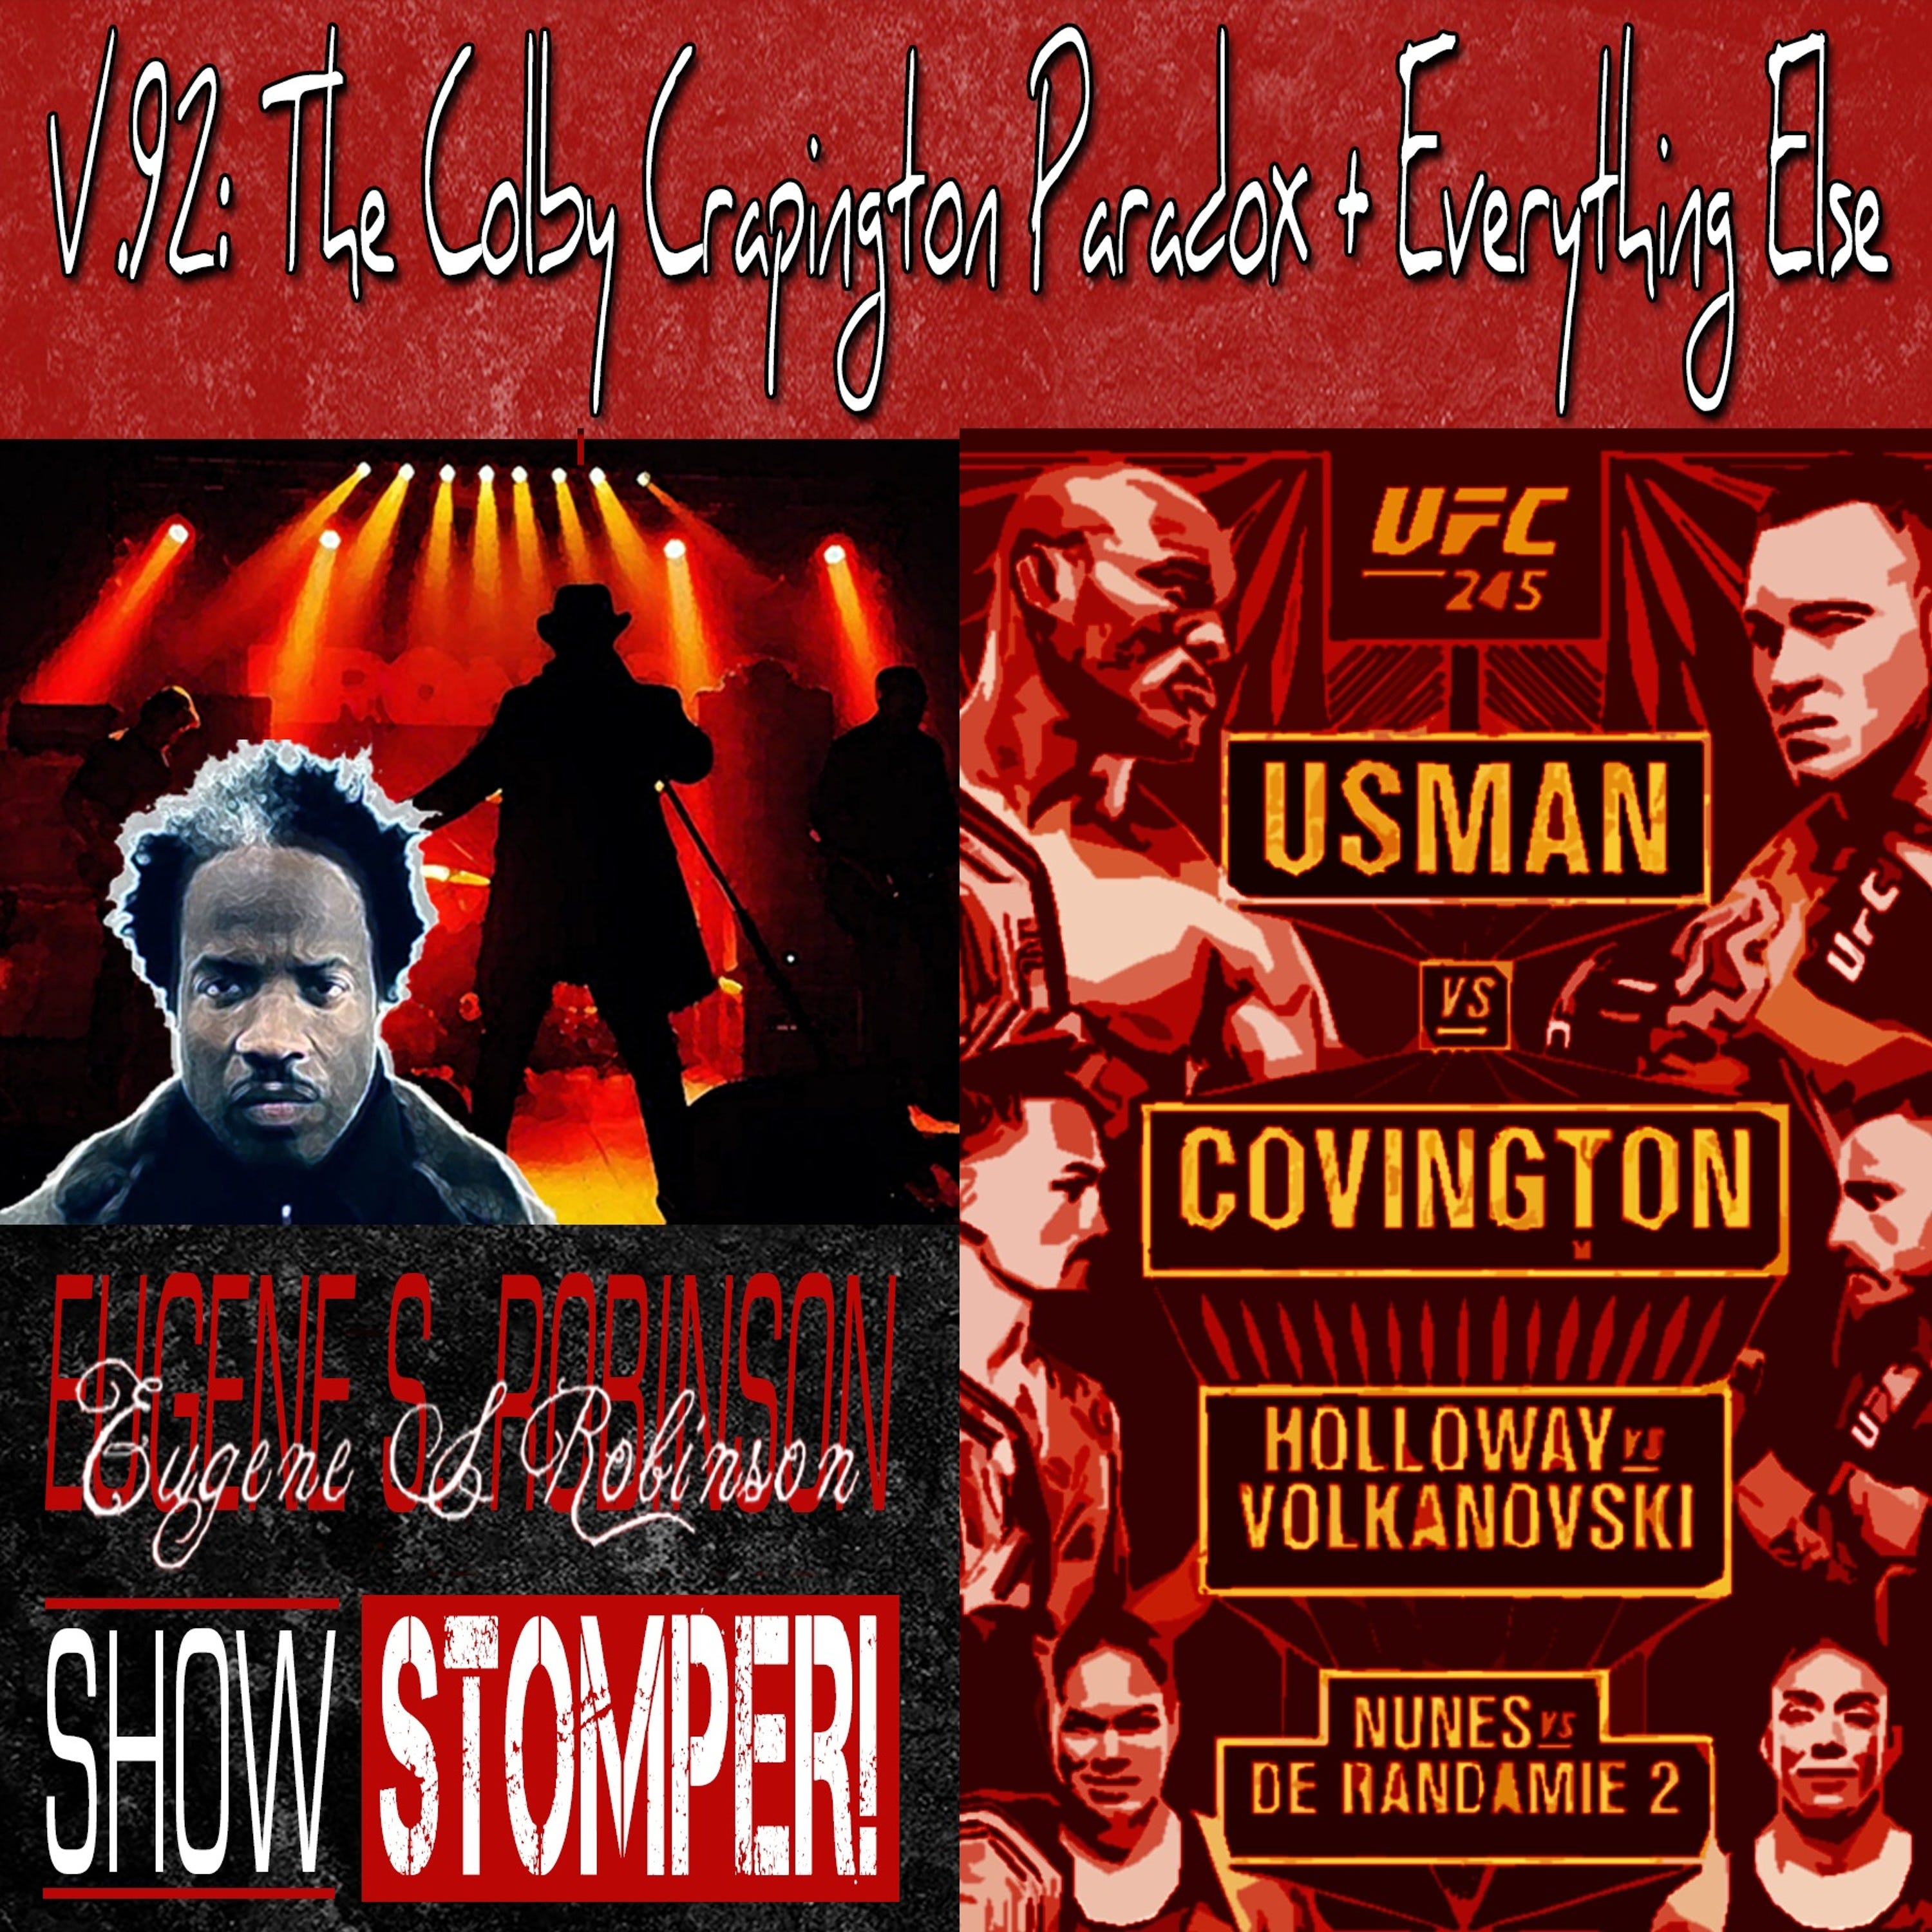 V.92 The Colby Crapington Paradox + Everything Else On The Eugene S. Robinson Show Stomper!